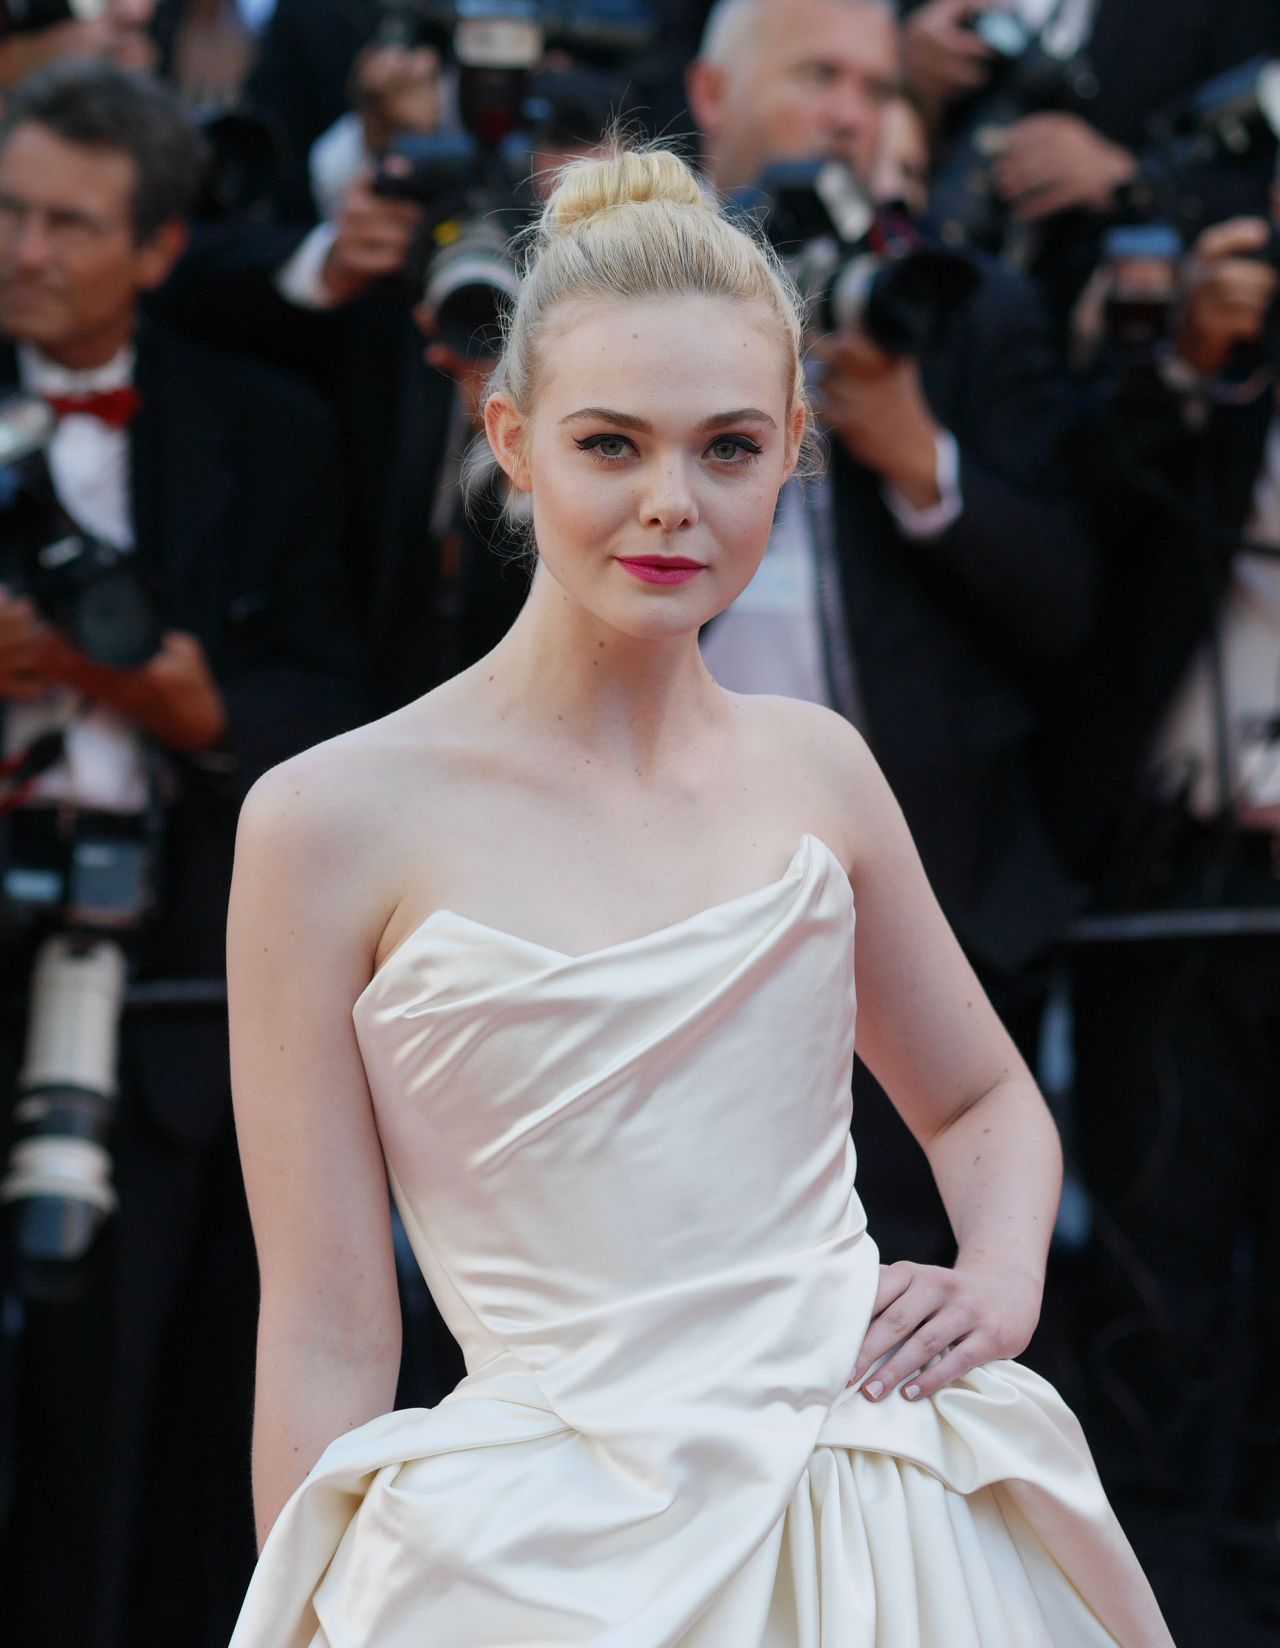 Elle Fanning - Opening Ceremony Of The 70th Cannes Film Festival 05/17/2017